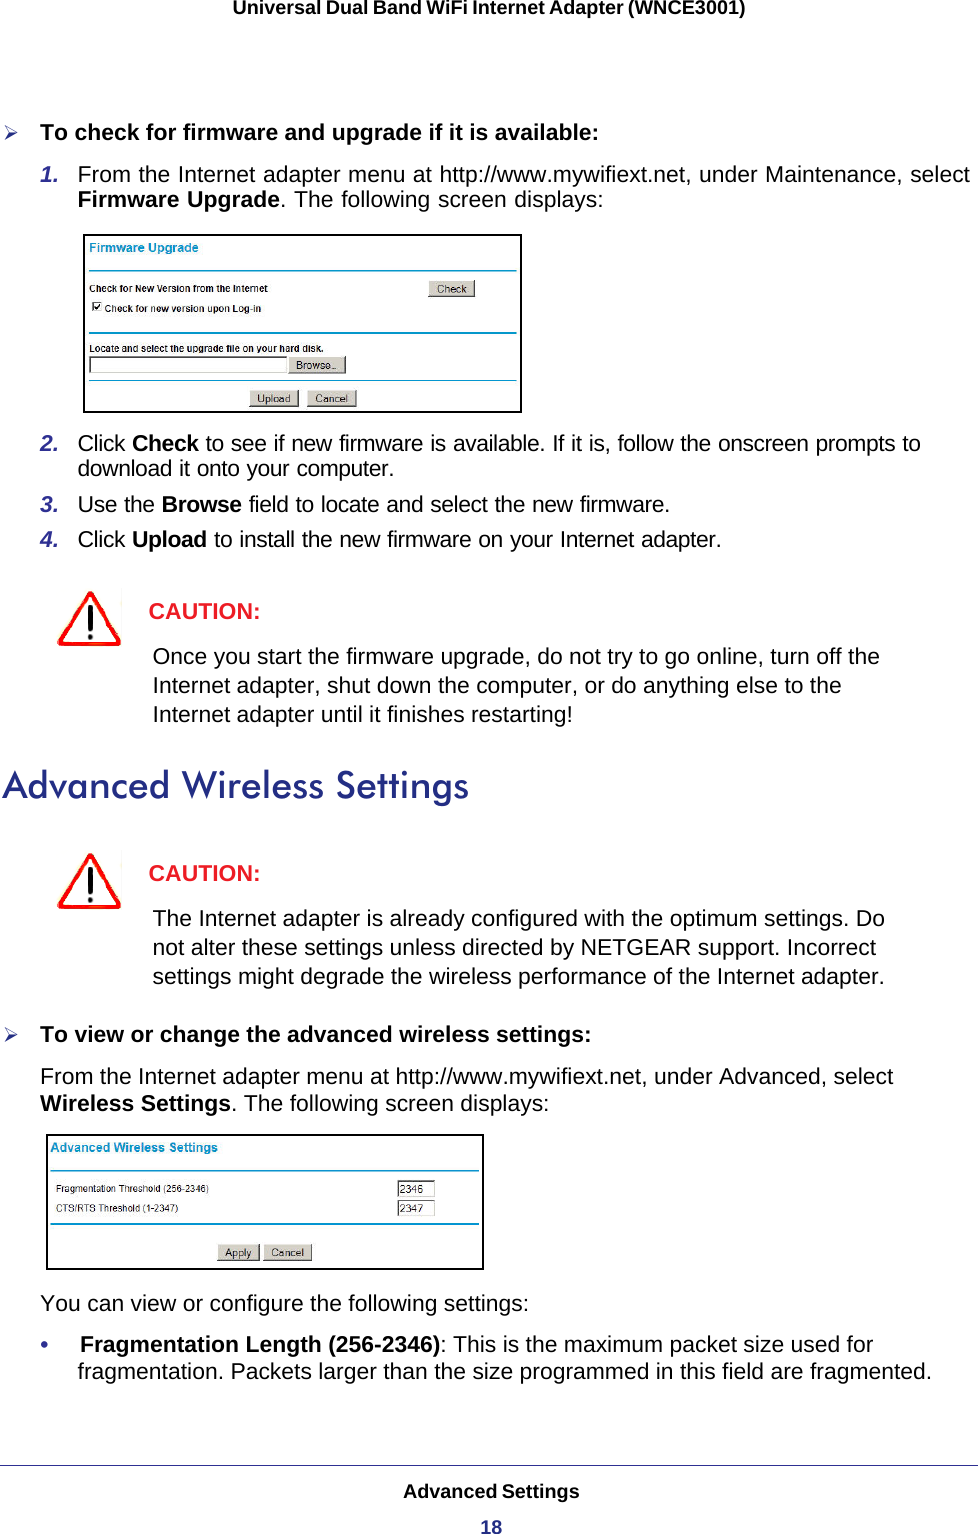 Advanced Settings18Universal Dual Band WiFi Internet Adapter (WNCE3001) To check for firmware and upgrade if it is available:1.  From the Internet adapter menu at http://www.mywifiext.net, under Maintenance, select Firmware Upgrade. The following screen displays:2.  Click Check to see if new firmware is available. If it is, follow the onscreen prompts to download it onto your computer.3.  Use the Browse field to locate and select the new firmware.4.  Click Upload to install the new firmware on your Internet adapter.CAUTION:Once you start the firmware upgrade, do not try to go online, turn off the Internet adapter, shut down the computer, or do anything else to the Internet adapter until it finishes restarting! Advanced Wireless SettingsCAUTION:The Internet adapter is already configured with the optimum settings. Do not alter these settings unless directed by NETGEAR support. Incorrect settings might degrade the wireless performance of the Internet adapter.To view or change the advanced wireless settings:From the Internet adapter menu at http://www.mywifiext.net, under Advanced, select Wireless Settings. The following screen displays:You can view or configure the following settings:•     Fragmentation Length (256-2346): This is the maximum packet size used for fragmentation. Packets larger than the size programmed in this field are fragmented. 